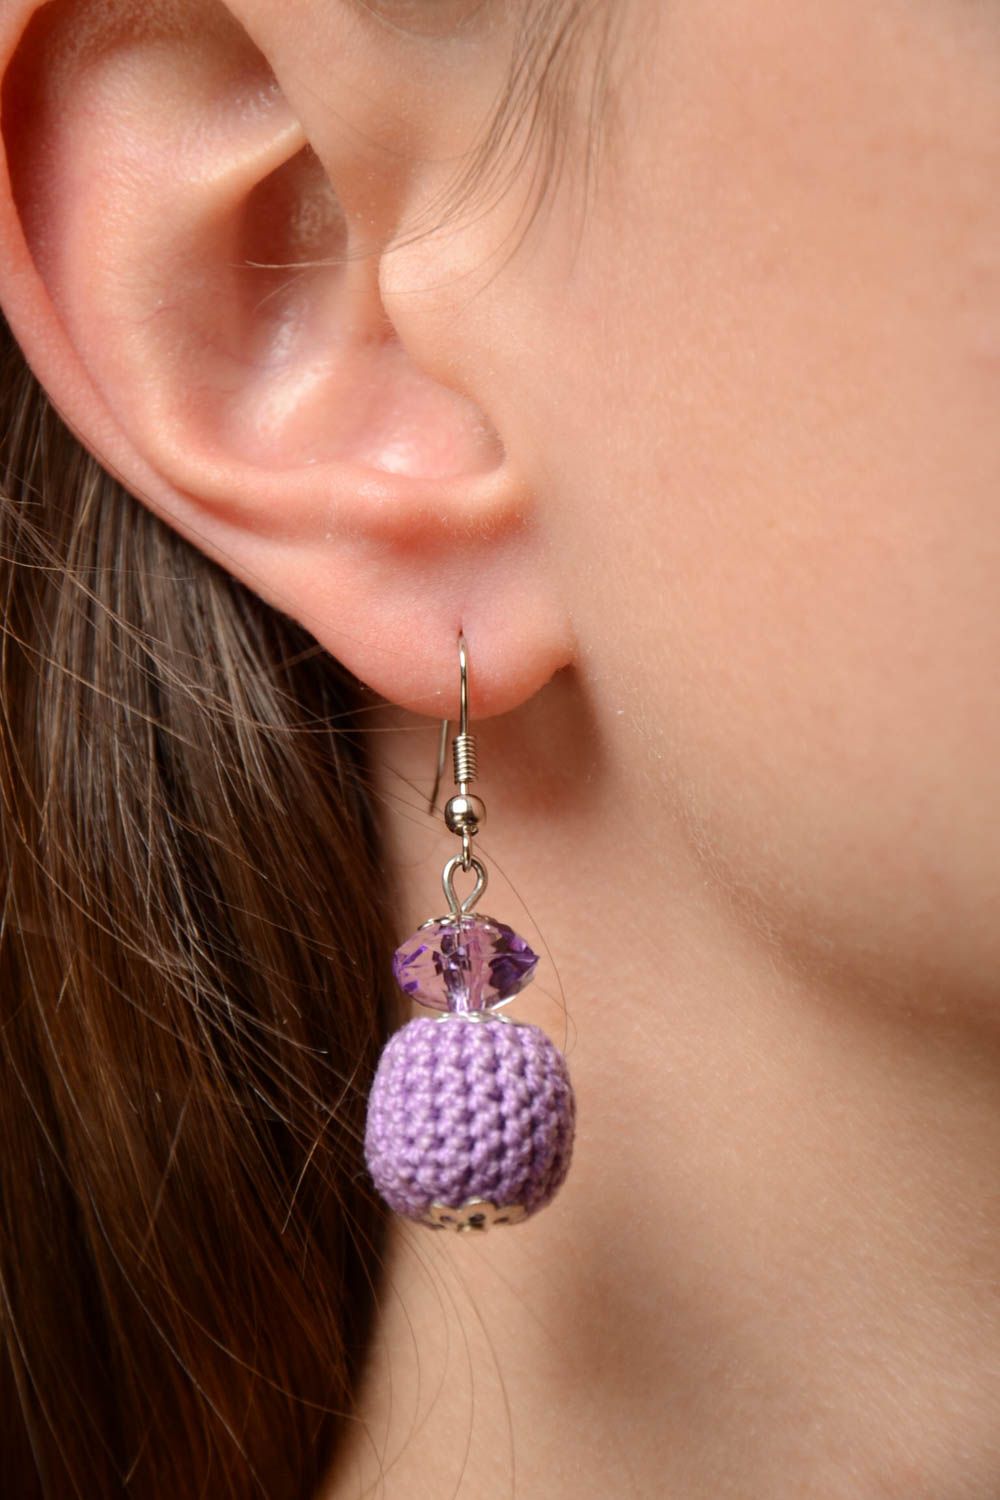 Handmade wooden bead earrings crocheted over with violet cotton threads photo 2